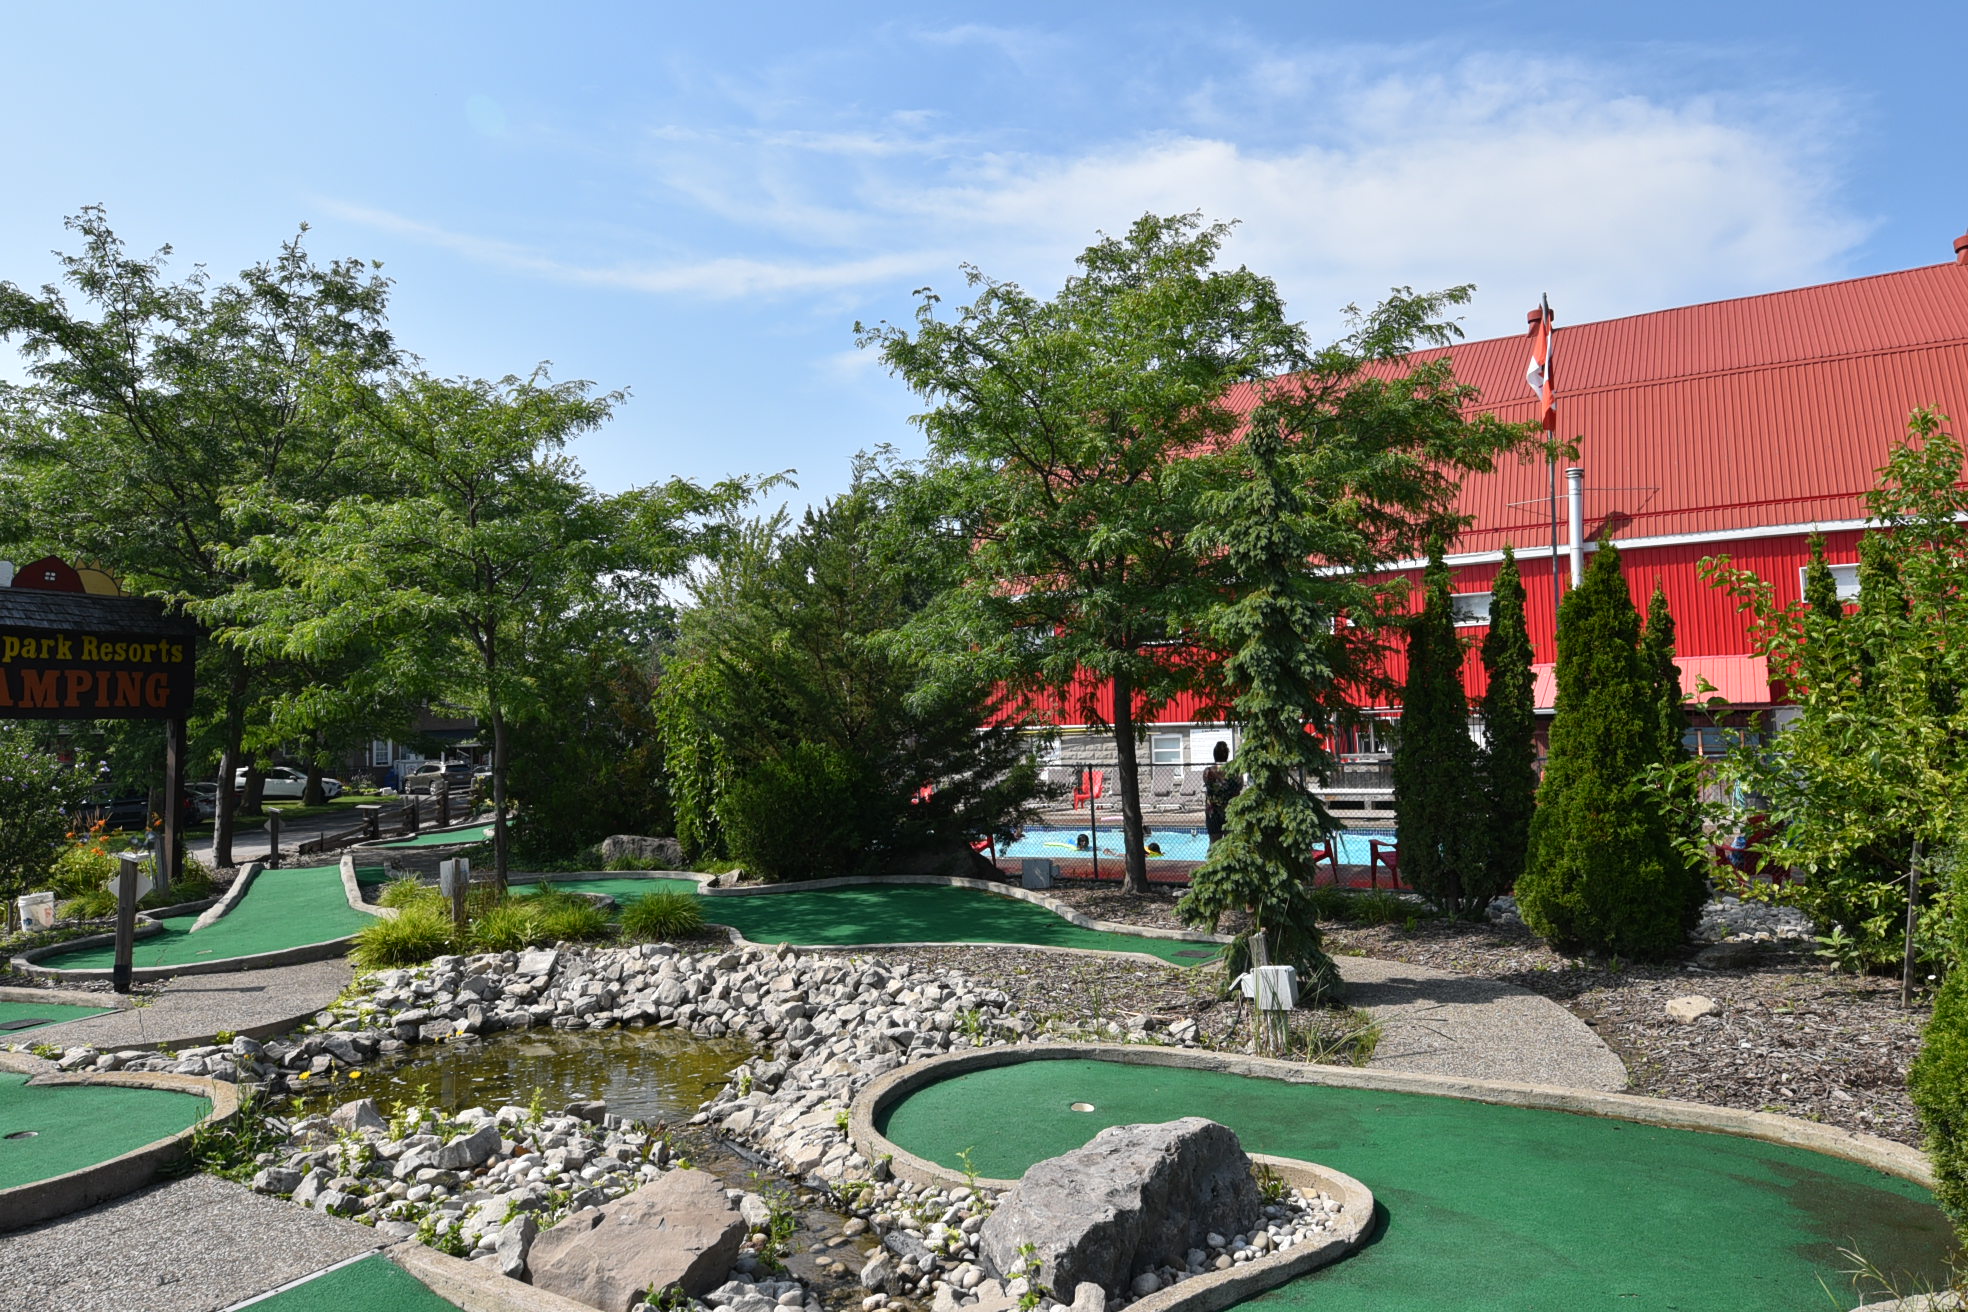 A miniature golf course winds around a lush landscape of trees under blue skies.